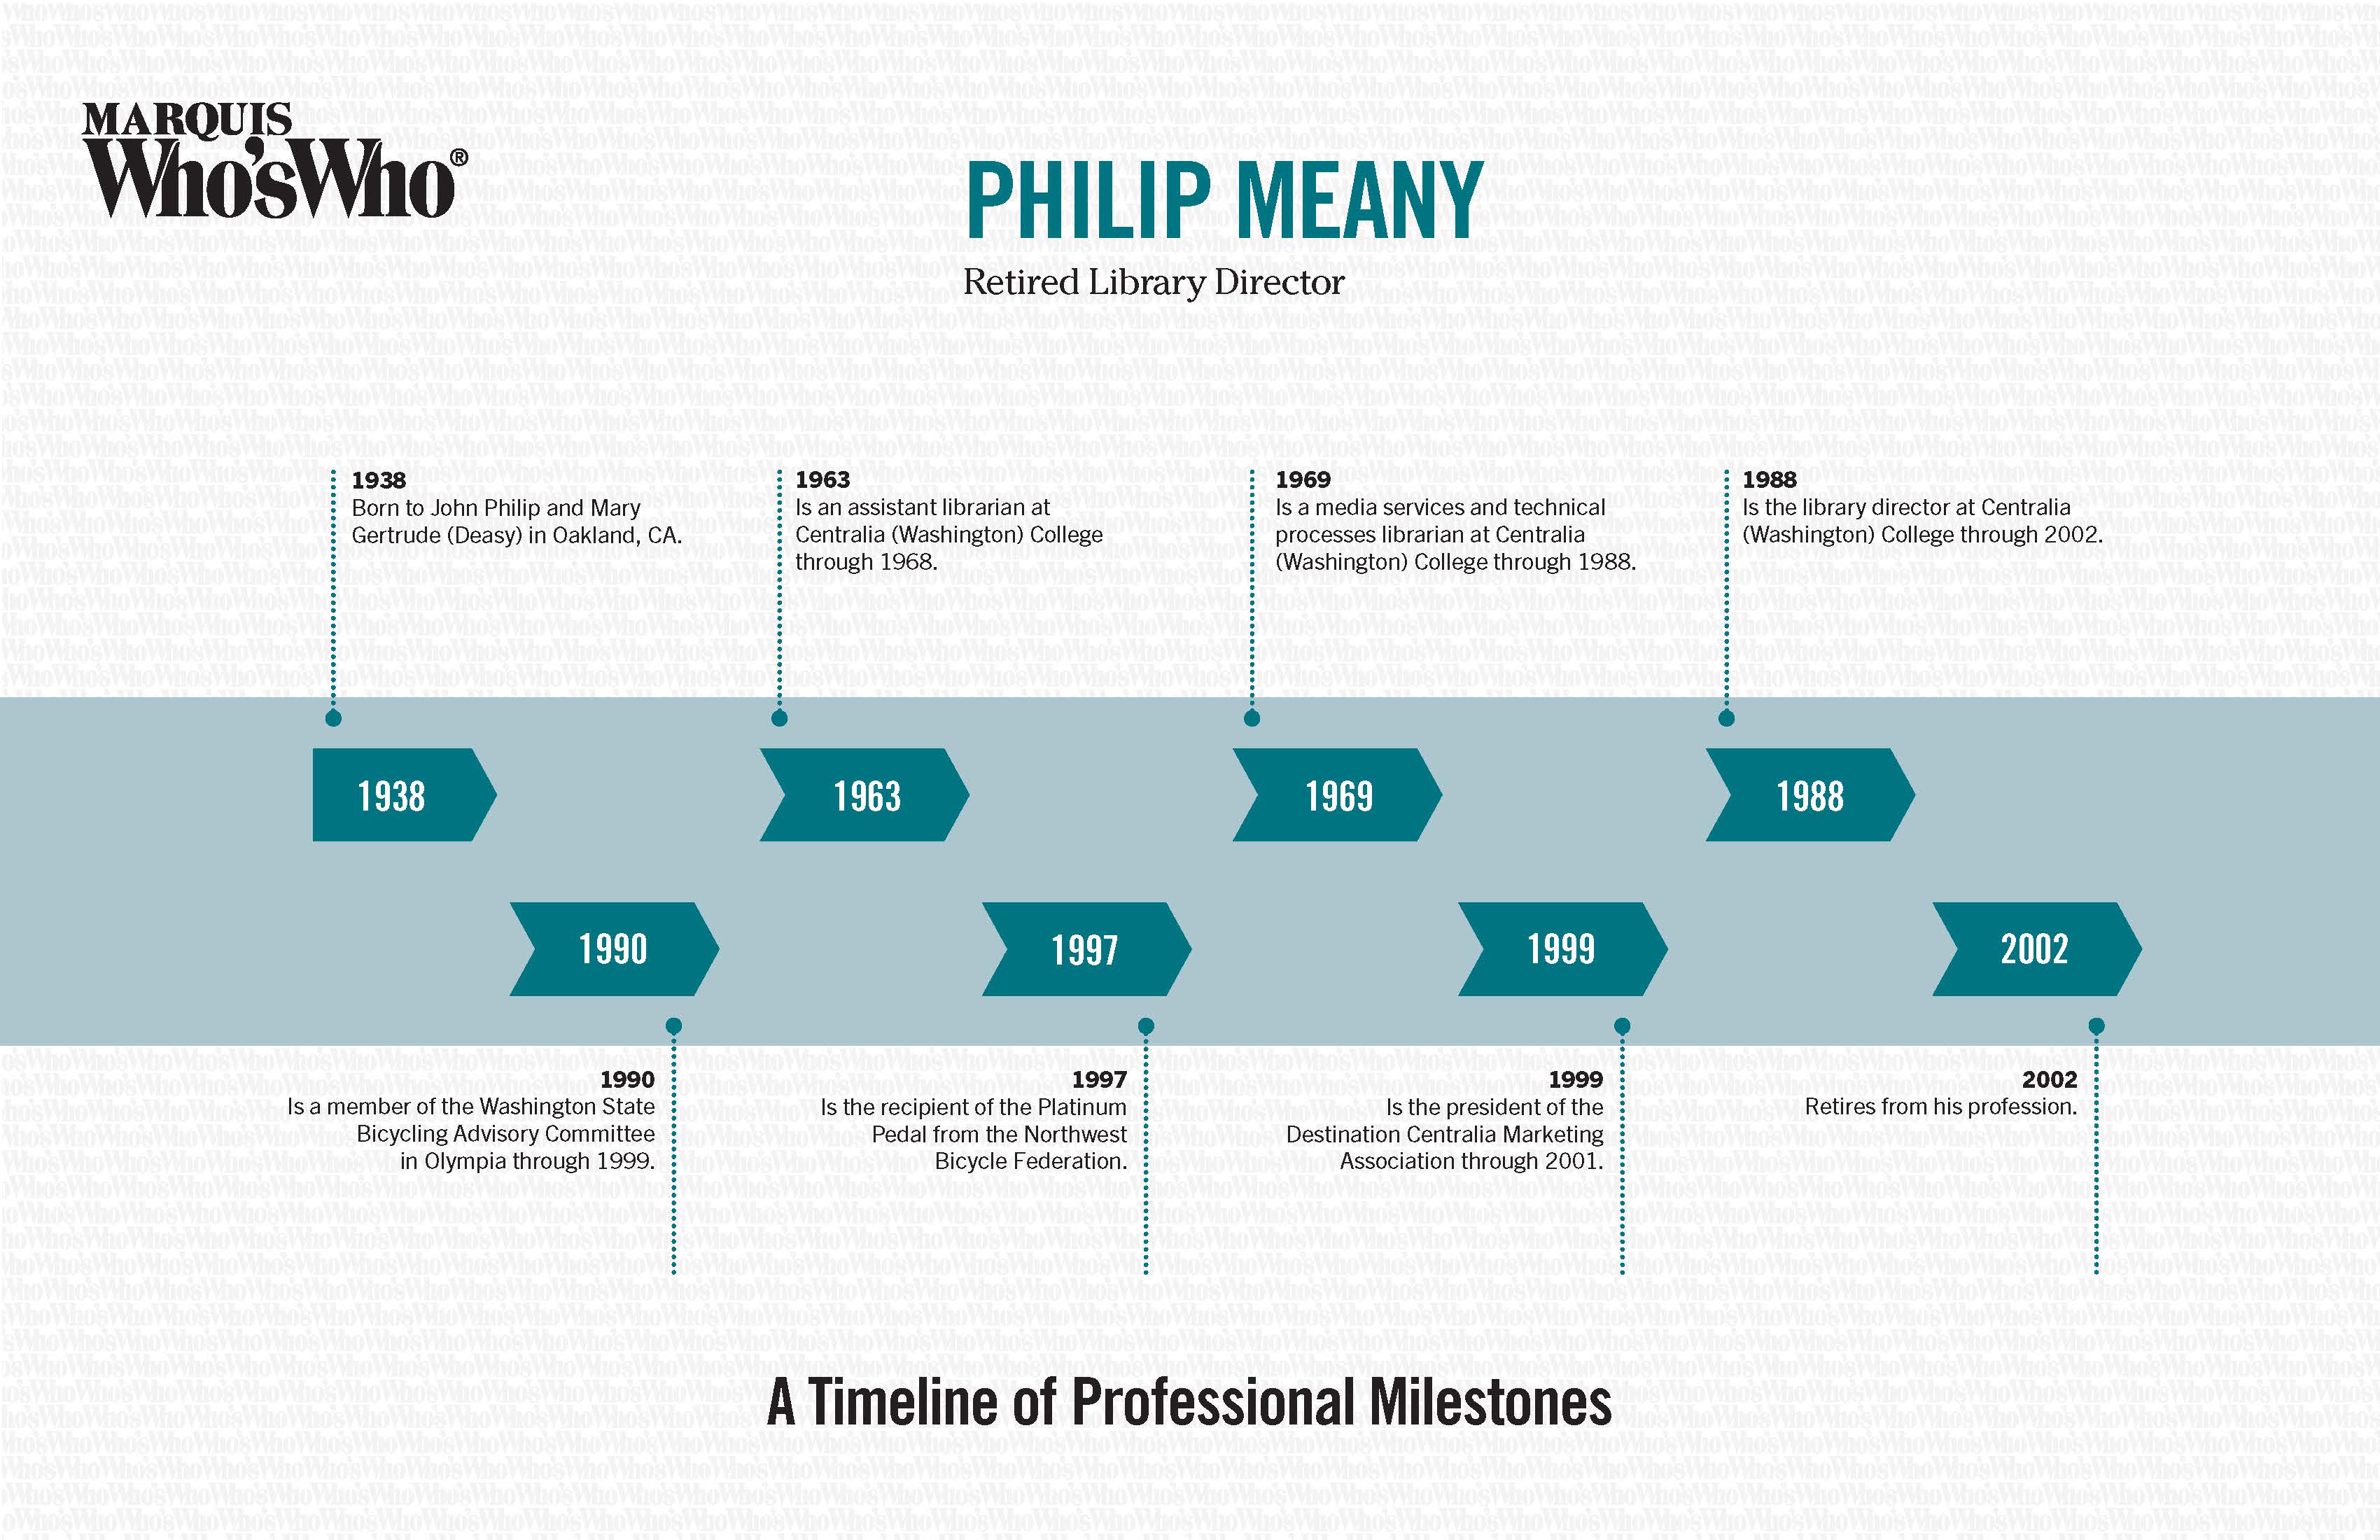 Philip Meany